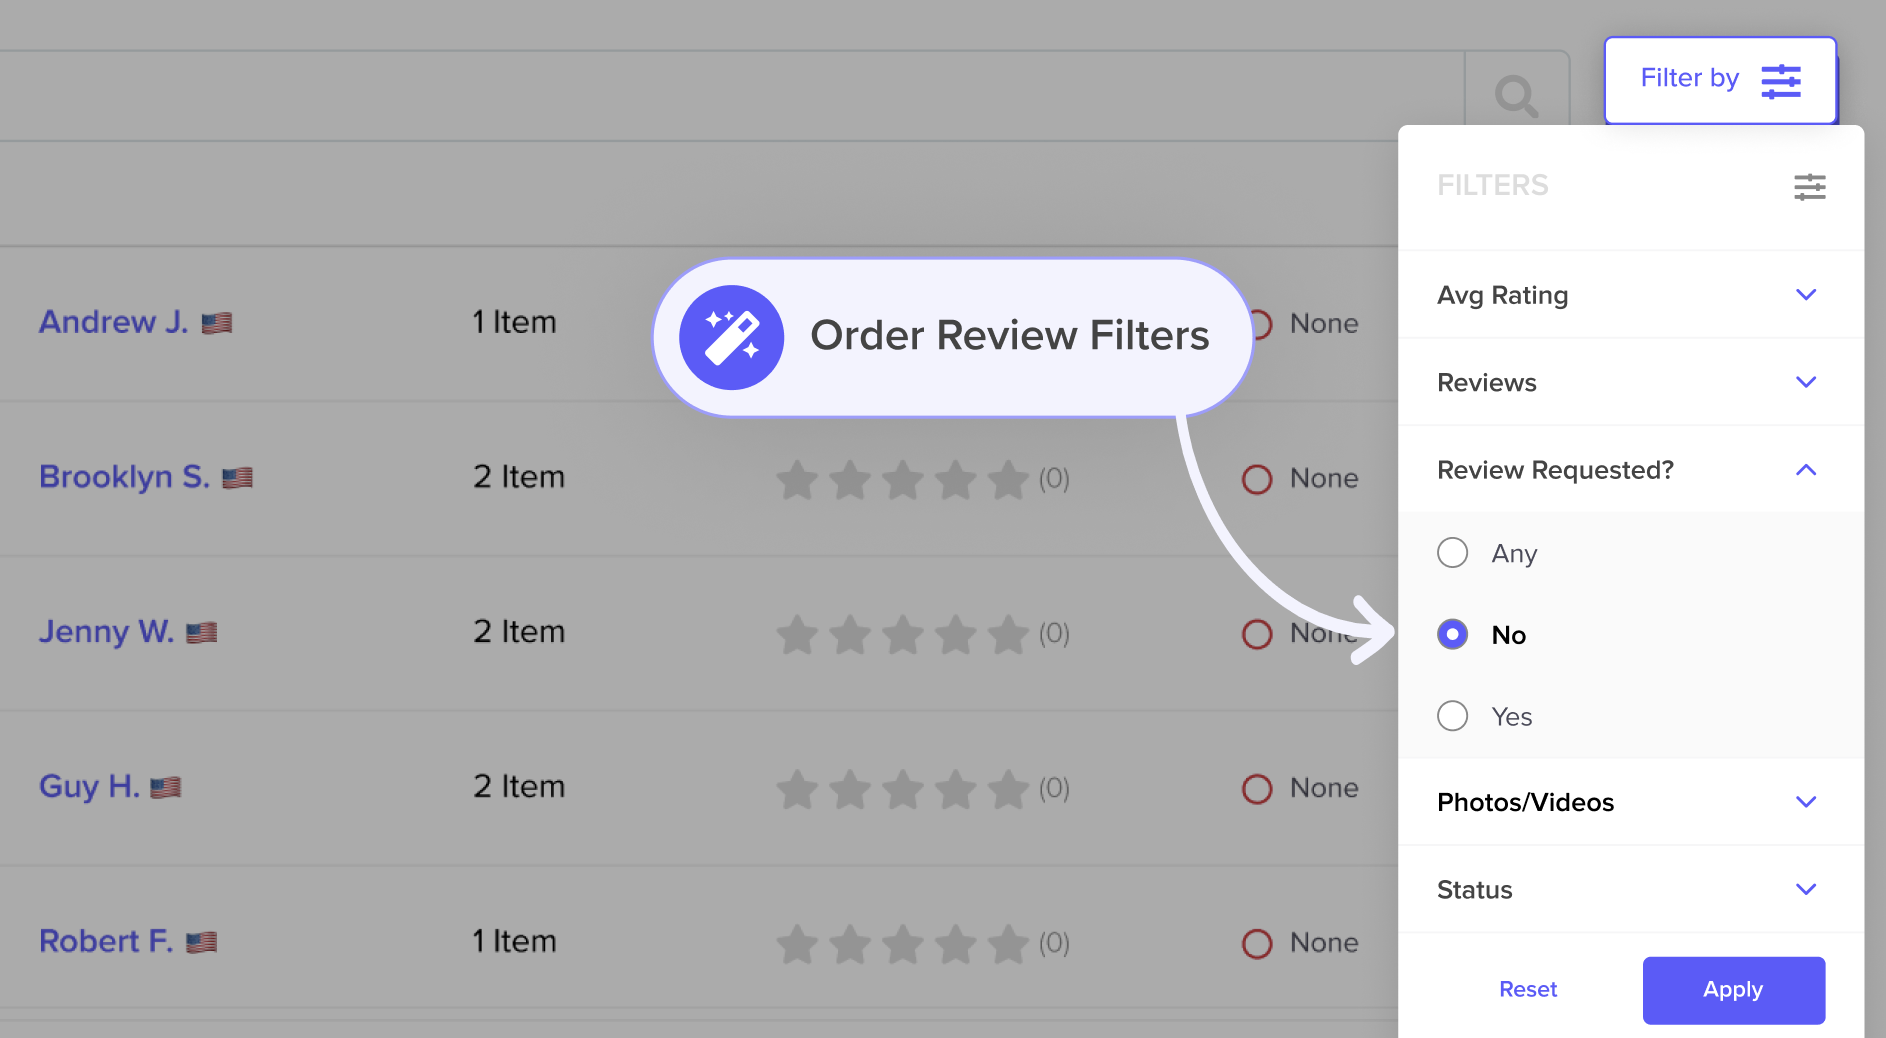 Find Orders That Haven't Been Reviewed